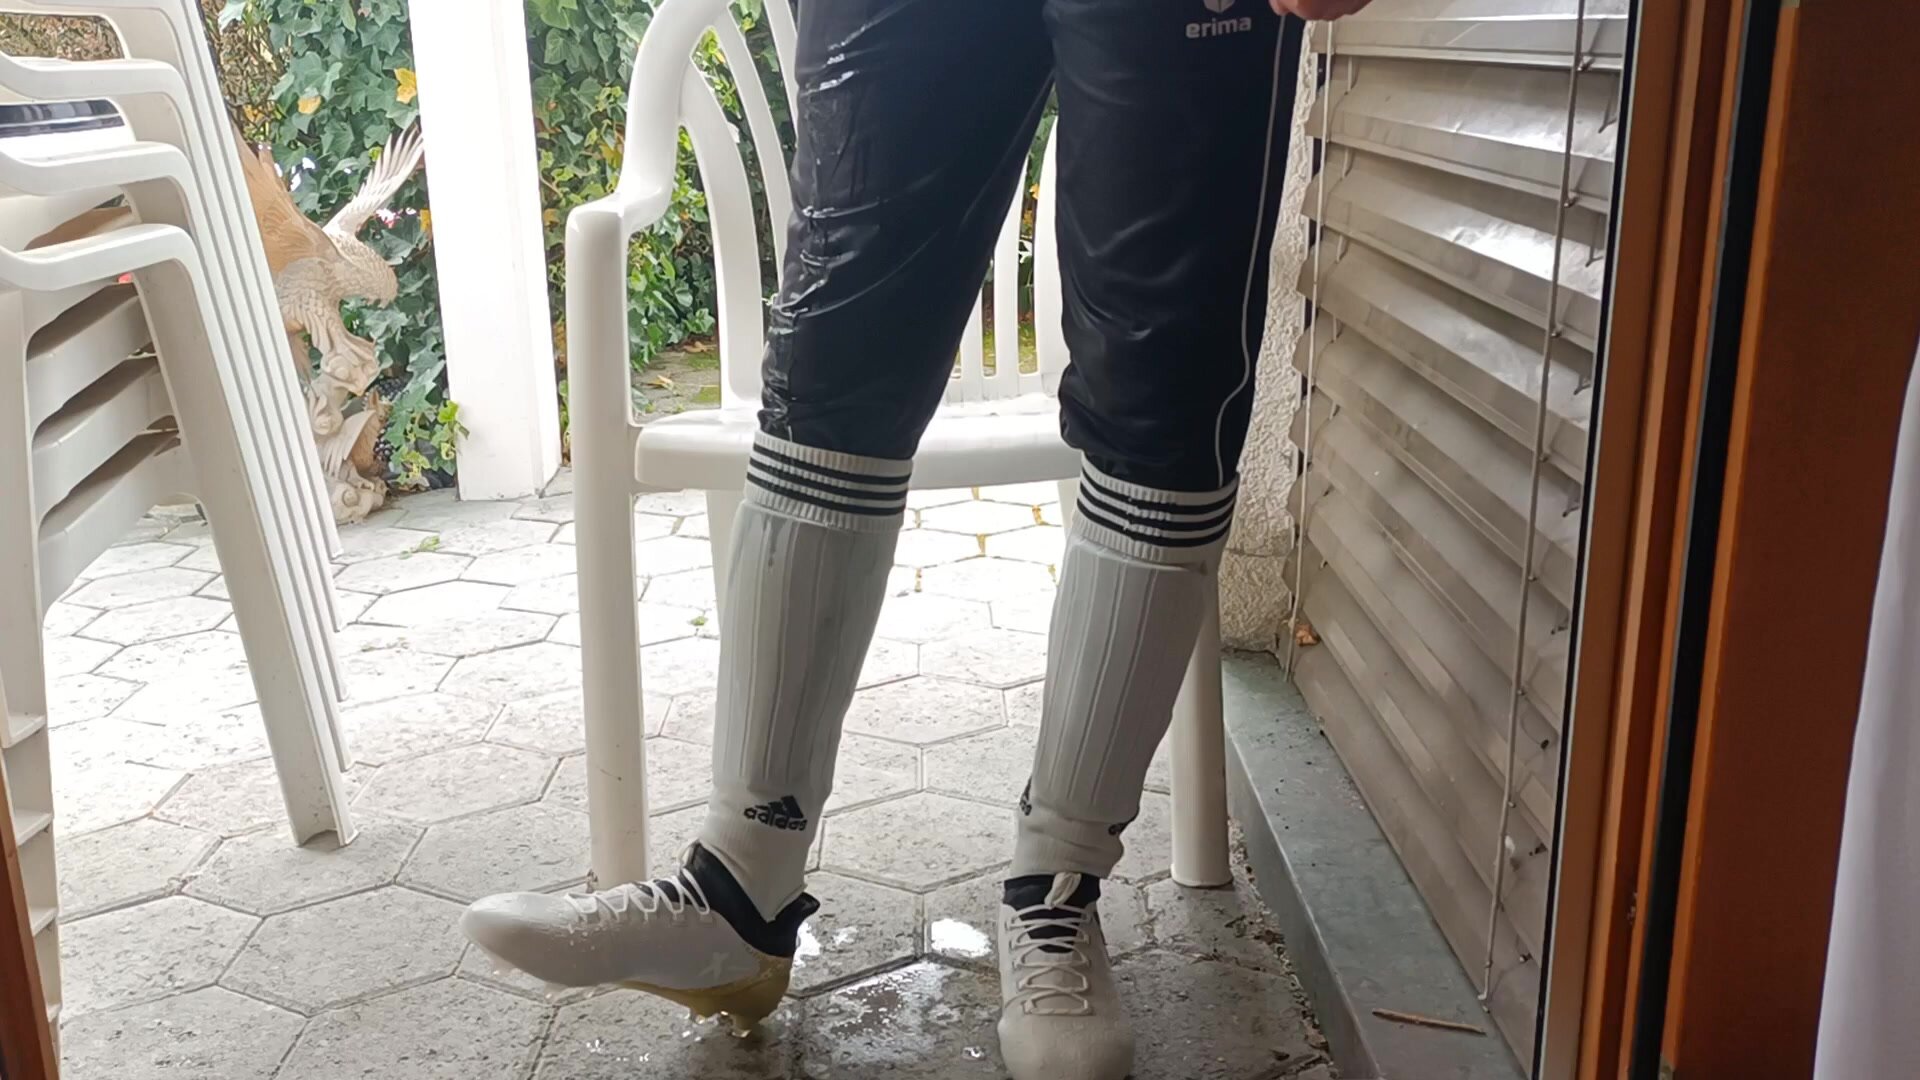 Piss in my new soccer gear before going out practicing